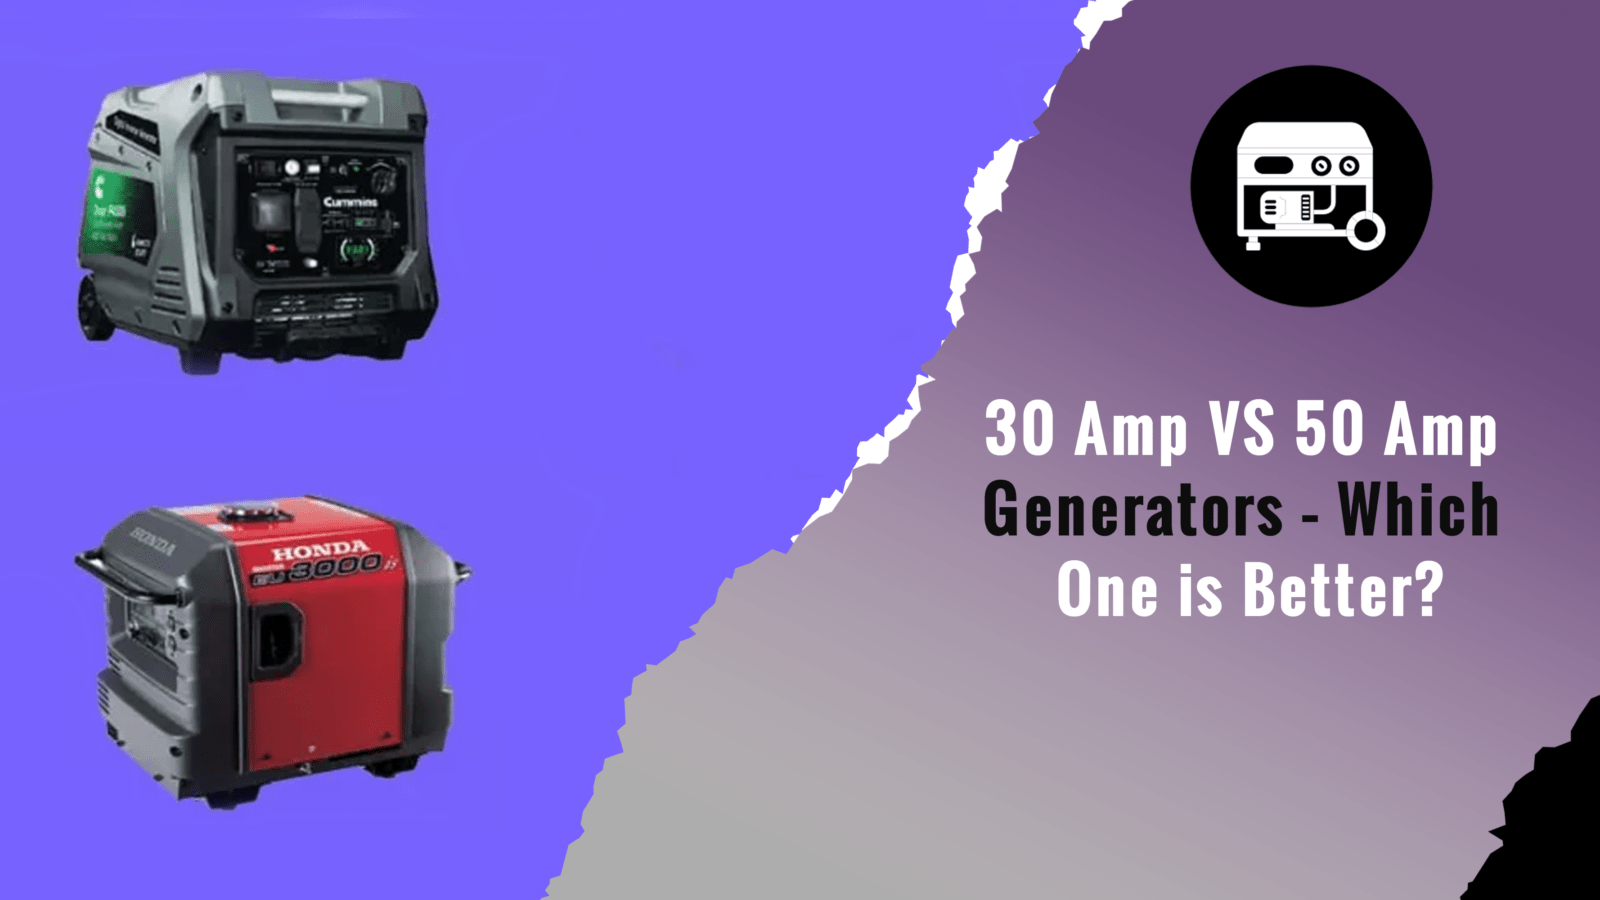 30 Amp VS 50 Amp Generators – Which One is Better?